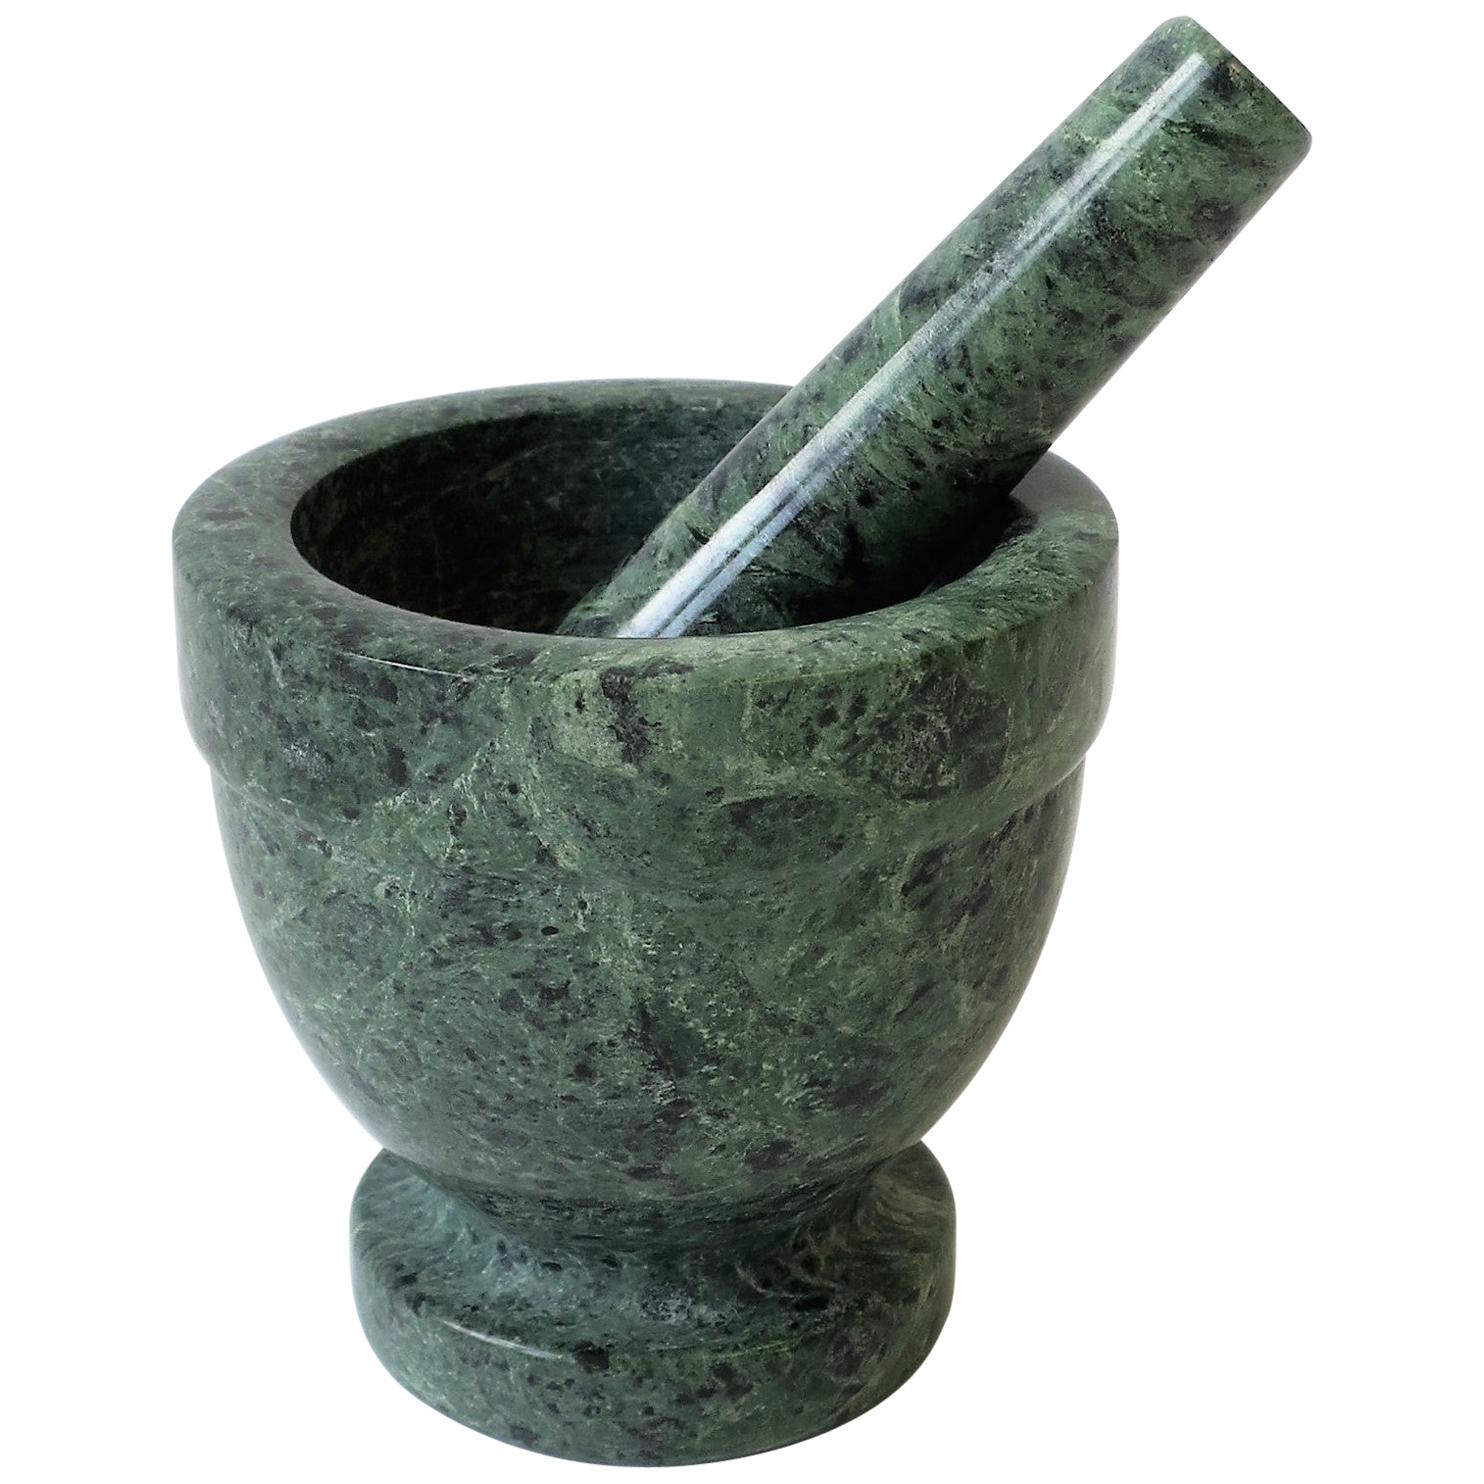 Mortar and Pestle in Dark Green and Black Marble